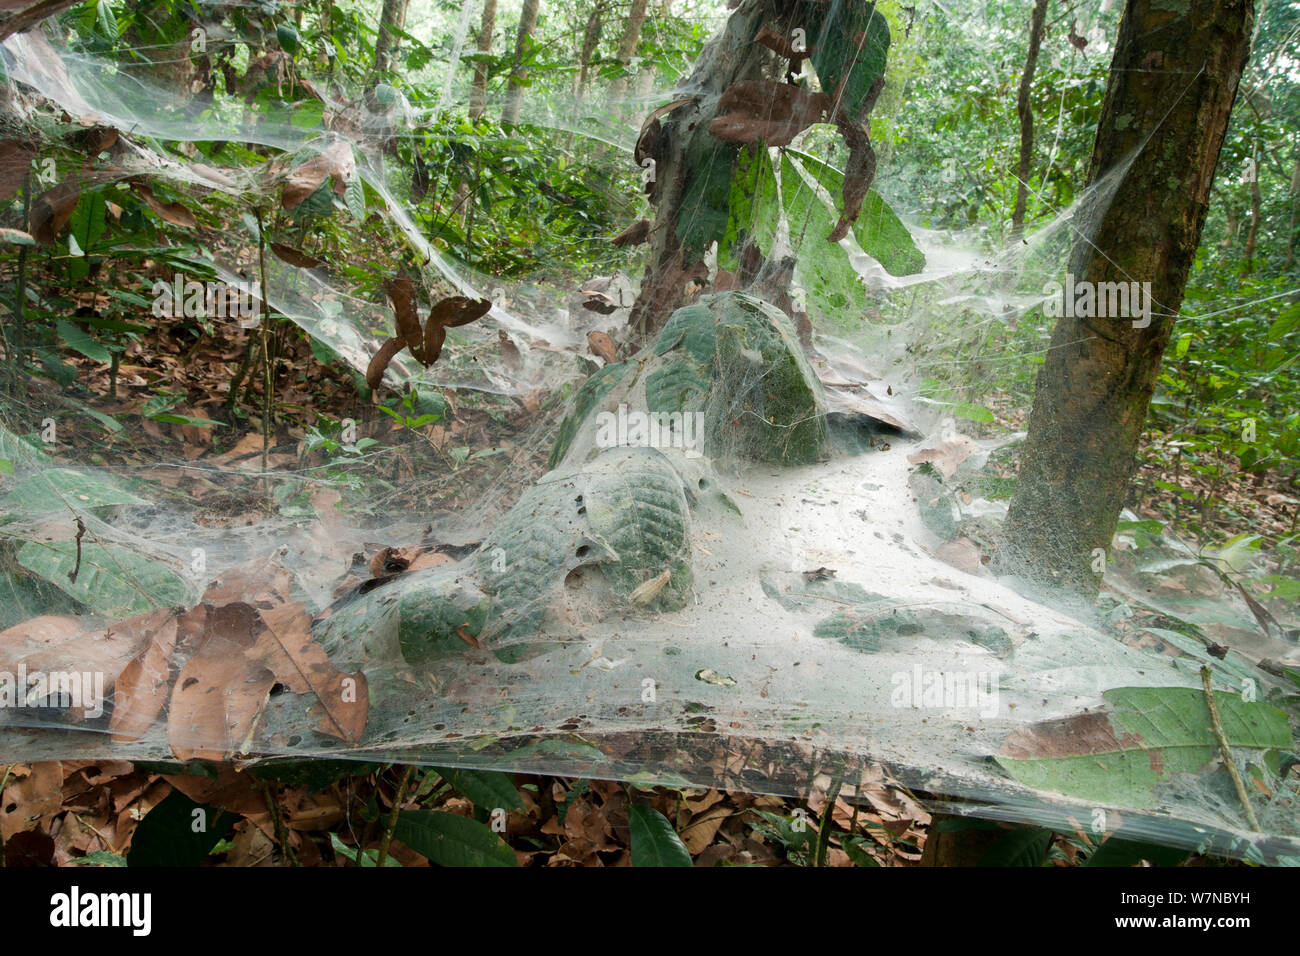 Funnel Web Spider (Agelena consociata) nest colony and associated web traps -  an example of arachnid semi-social behaviour where colonies co-operate to spin large forest webs Bai Hokou, Dzanga-Ndoki National Park, Central African Republic. Stock Photo